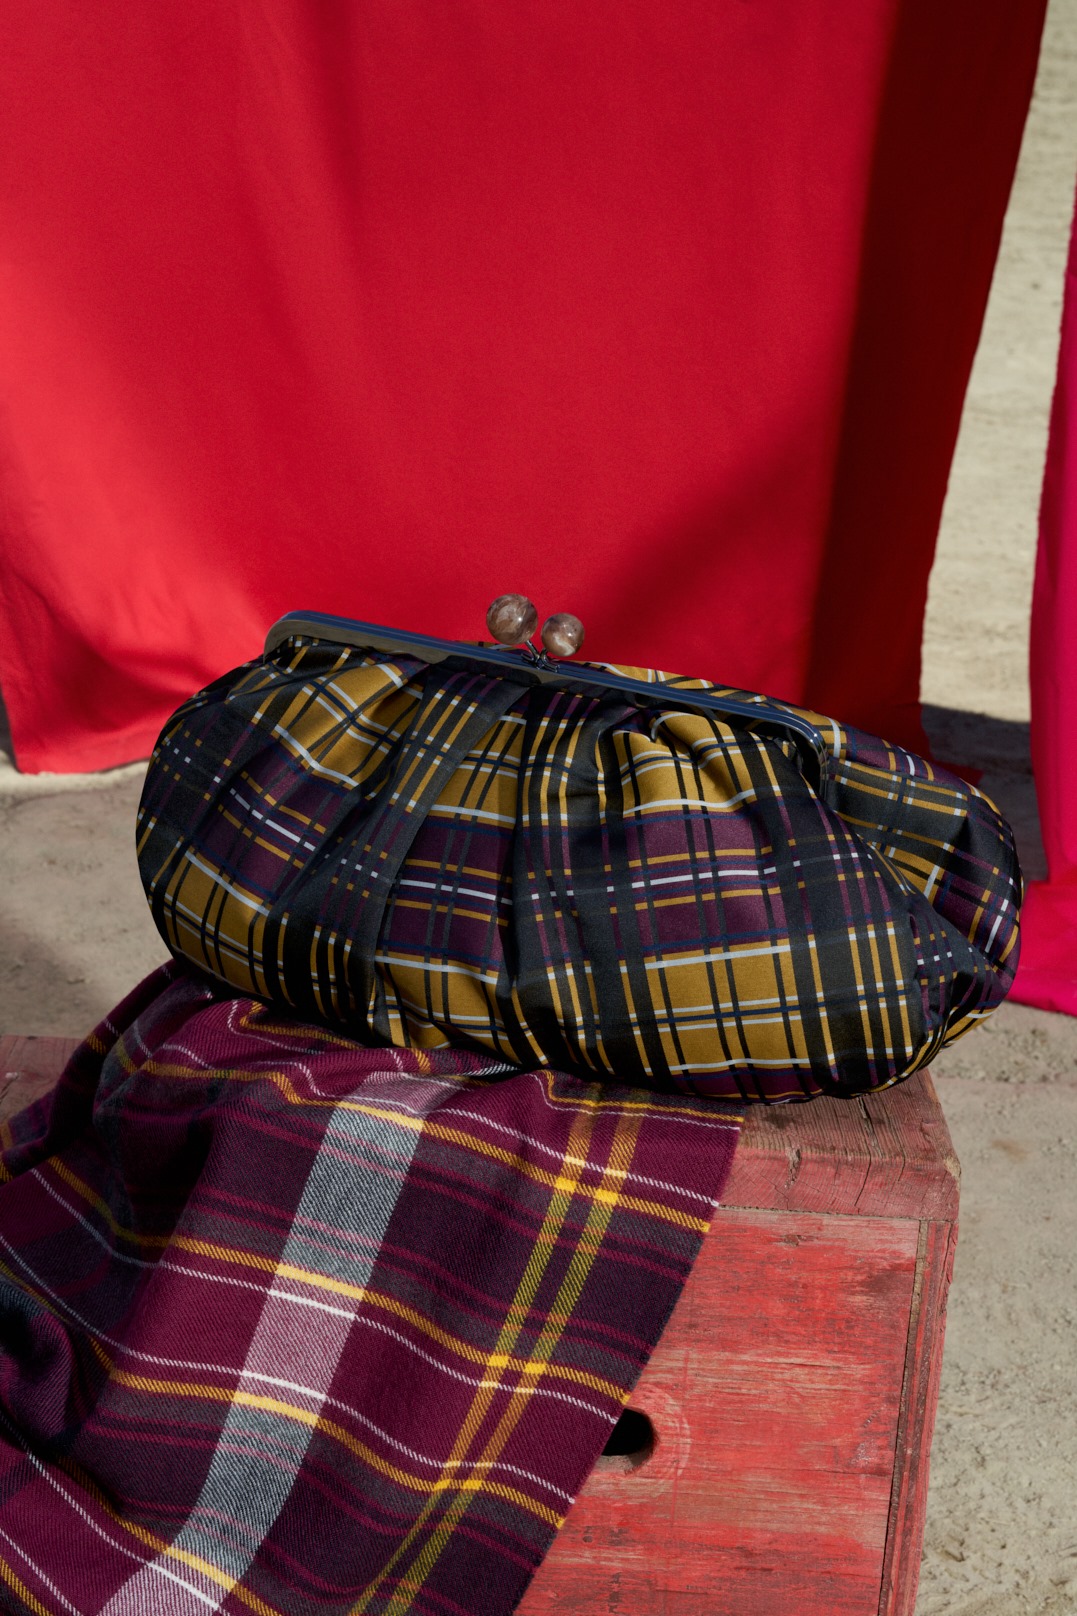 Meet the ultimate Pasticcino Bag for autumn: jacquard tartan fabric add a touch of personal charm to everyday style.